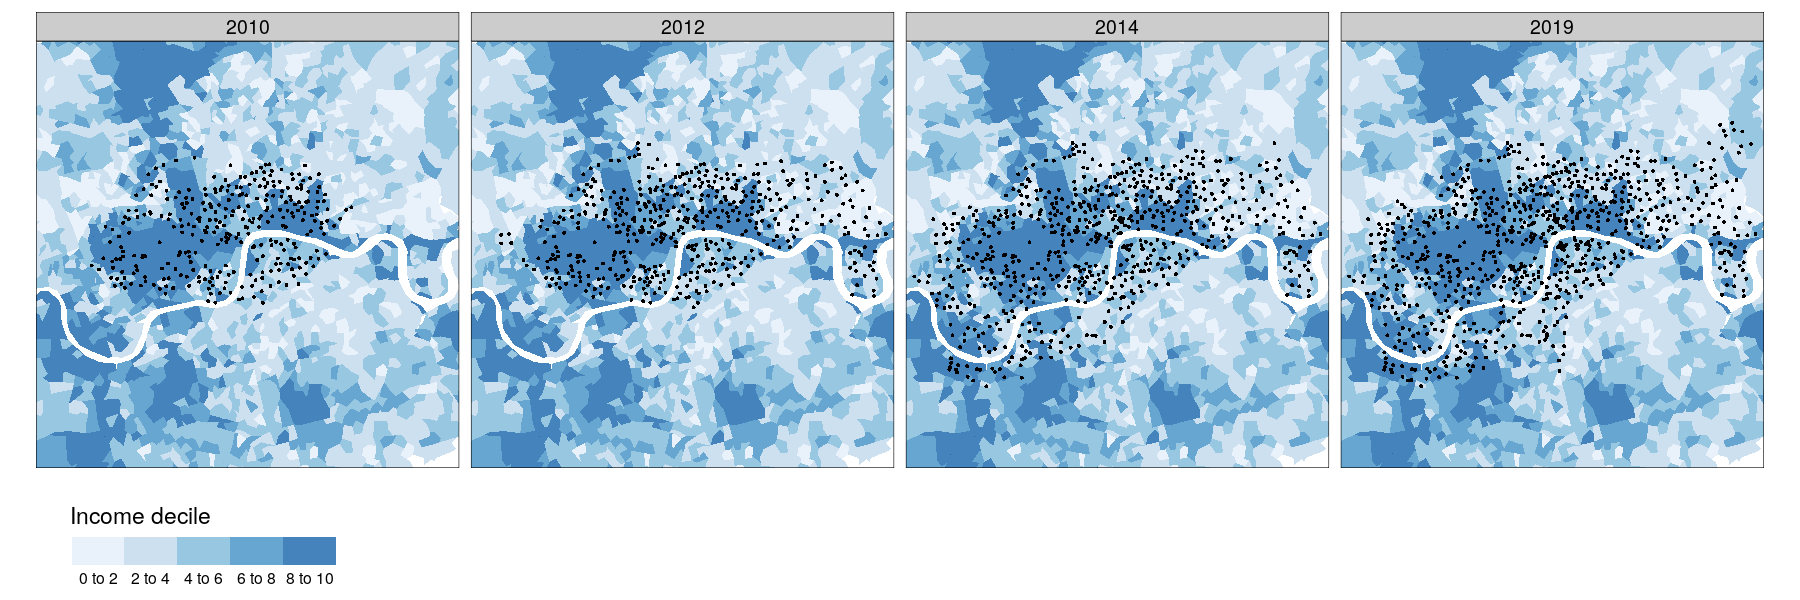 Changes in the spatial and social distribution of docking stations over time, 2010-2019, showing four stages of expansion. Zone colour represents income decile, with 1 (white) representing the lowest income areas and 10 represents (blue) wealthy areas (top). The percentage of docking station in each income decile over time (blue) overlaying a representative distribution of income deciles for London (grey) for the same years (bottom). Note: a distribution representative of national income levels would be flat.